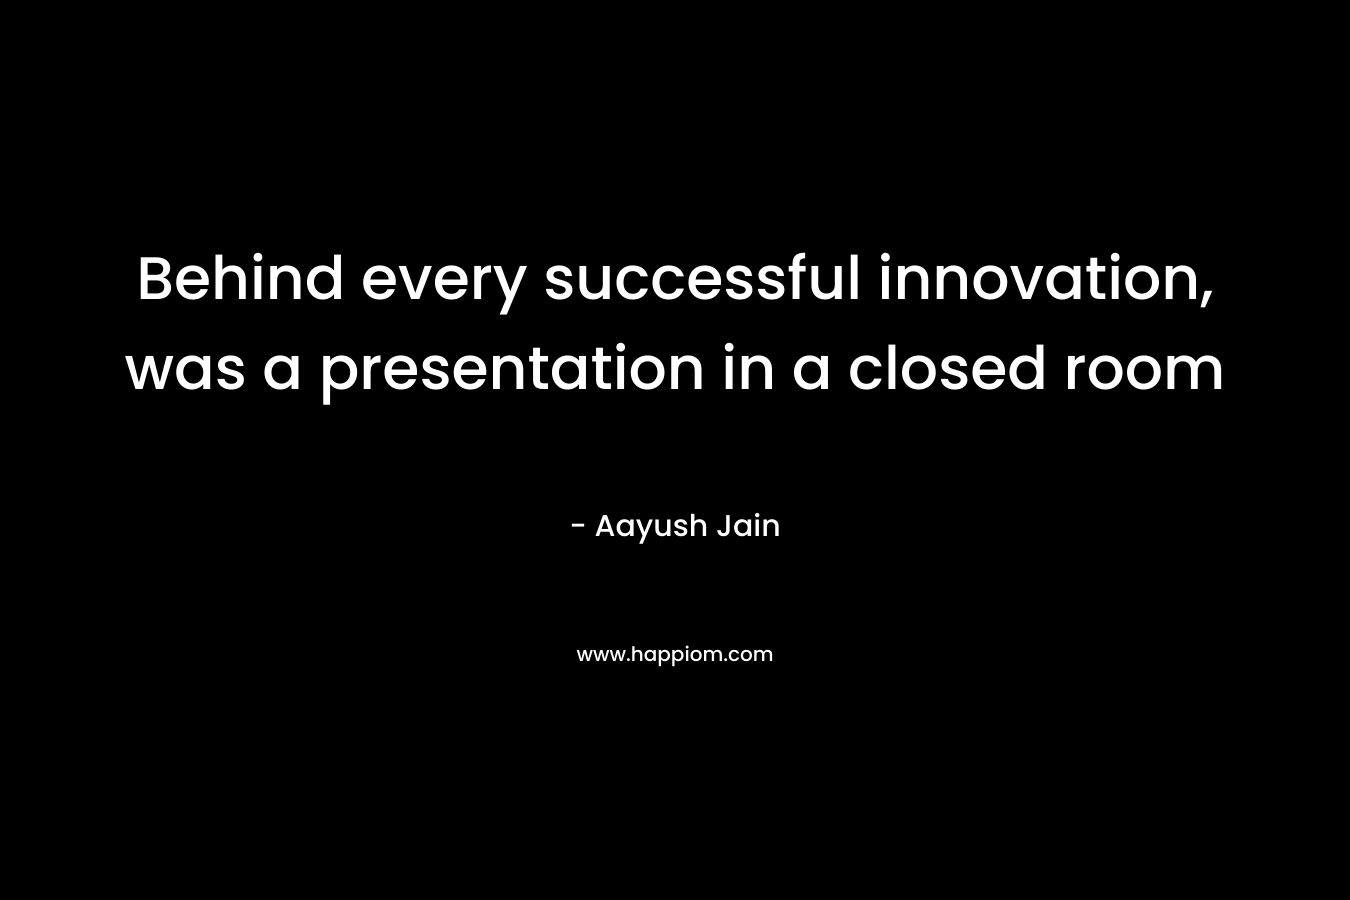 Behind every successful innovation, was a presentation in a closed room